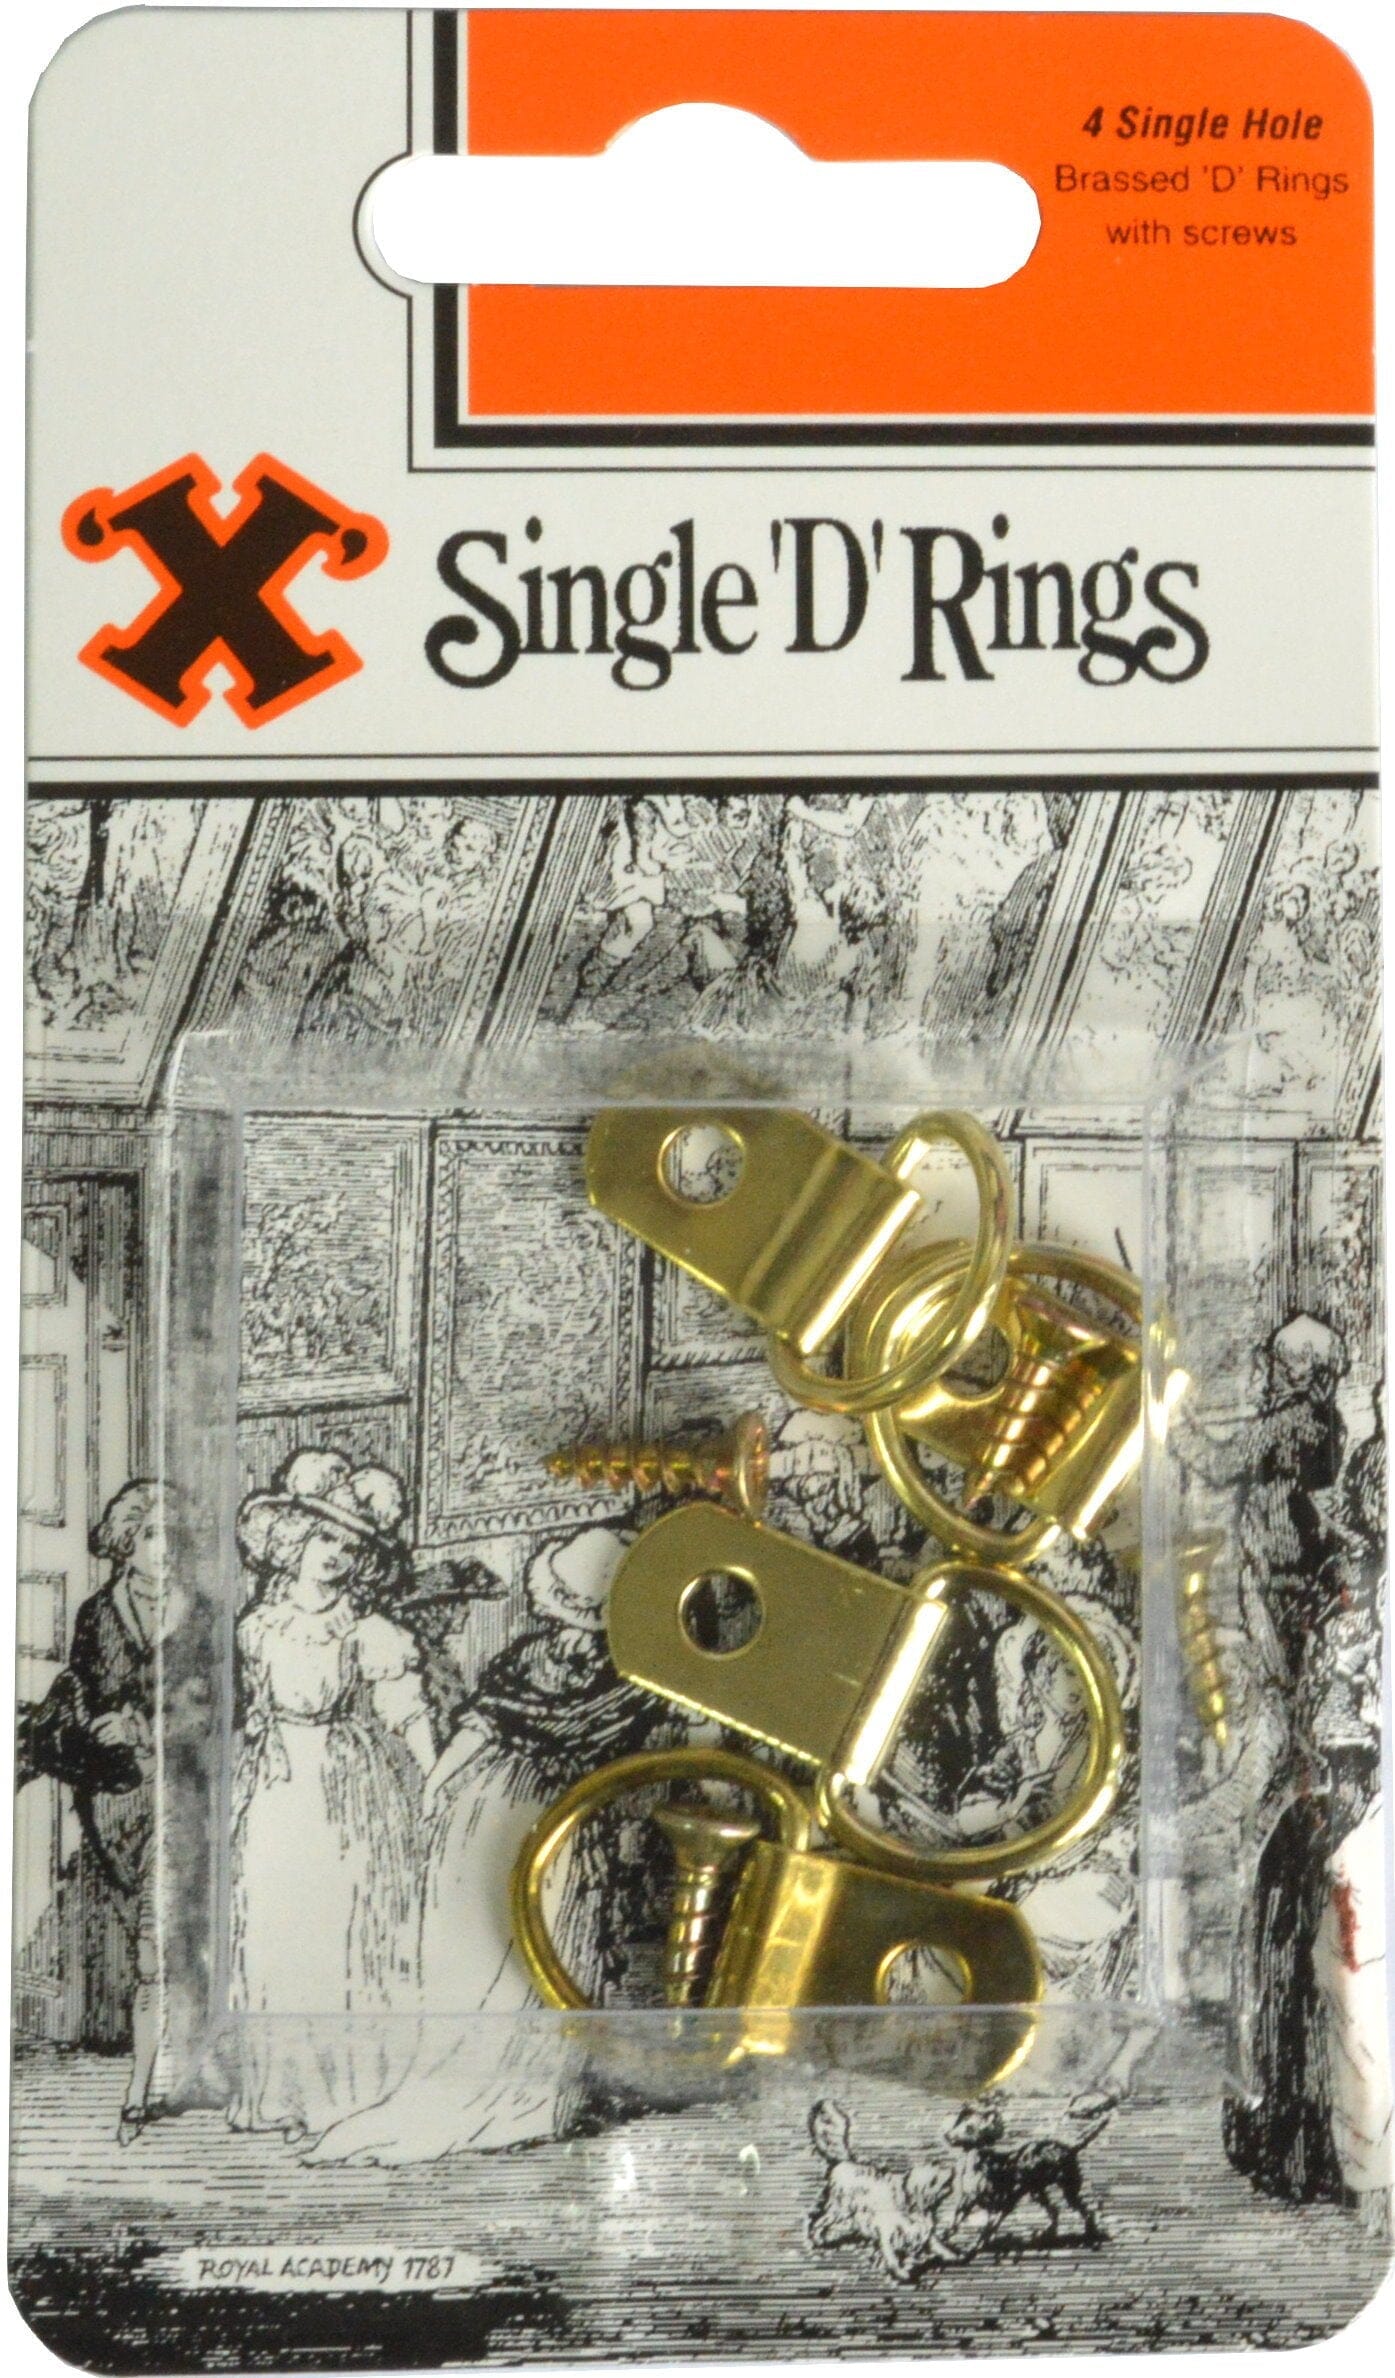 Bayonet X Picture D Rings Brassed - 4pce Blister Pack Single